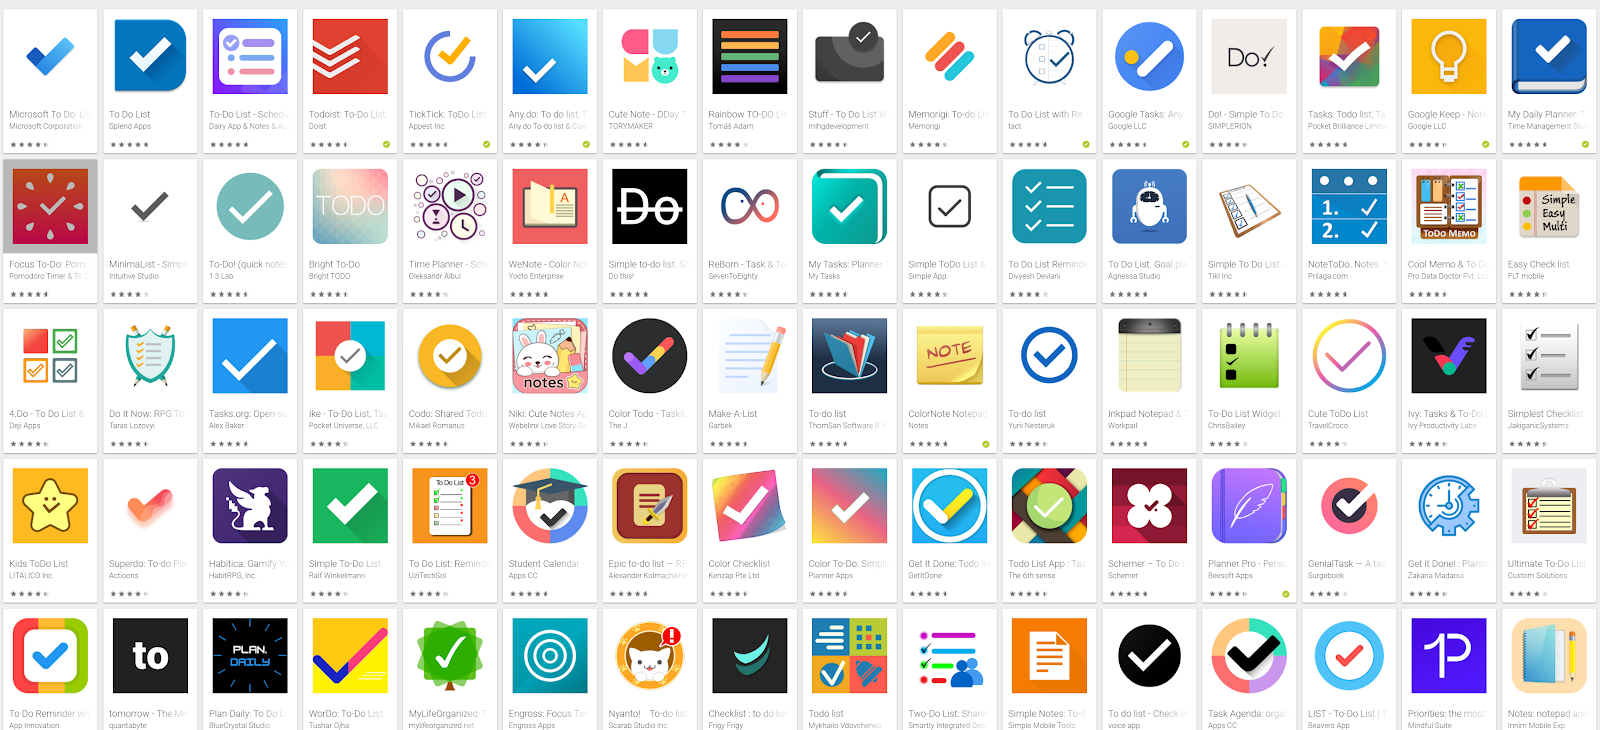 List of search result for the keyword to do list and shows various mobile app icon design.